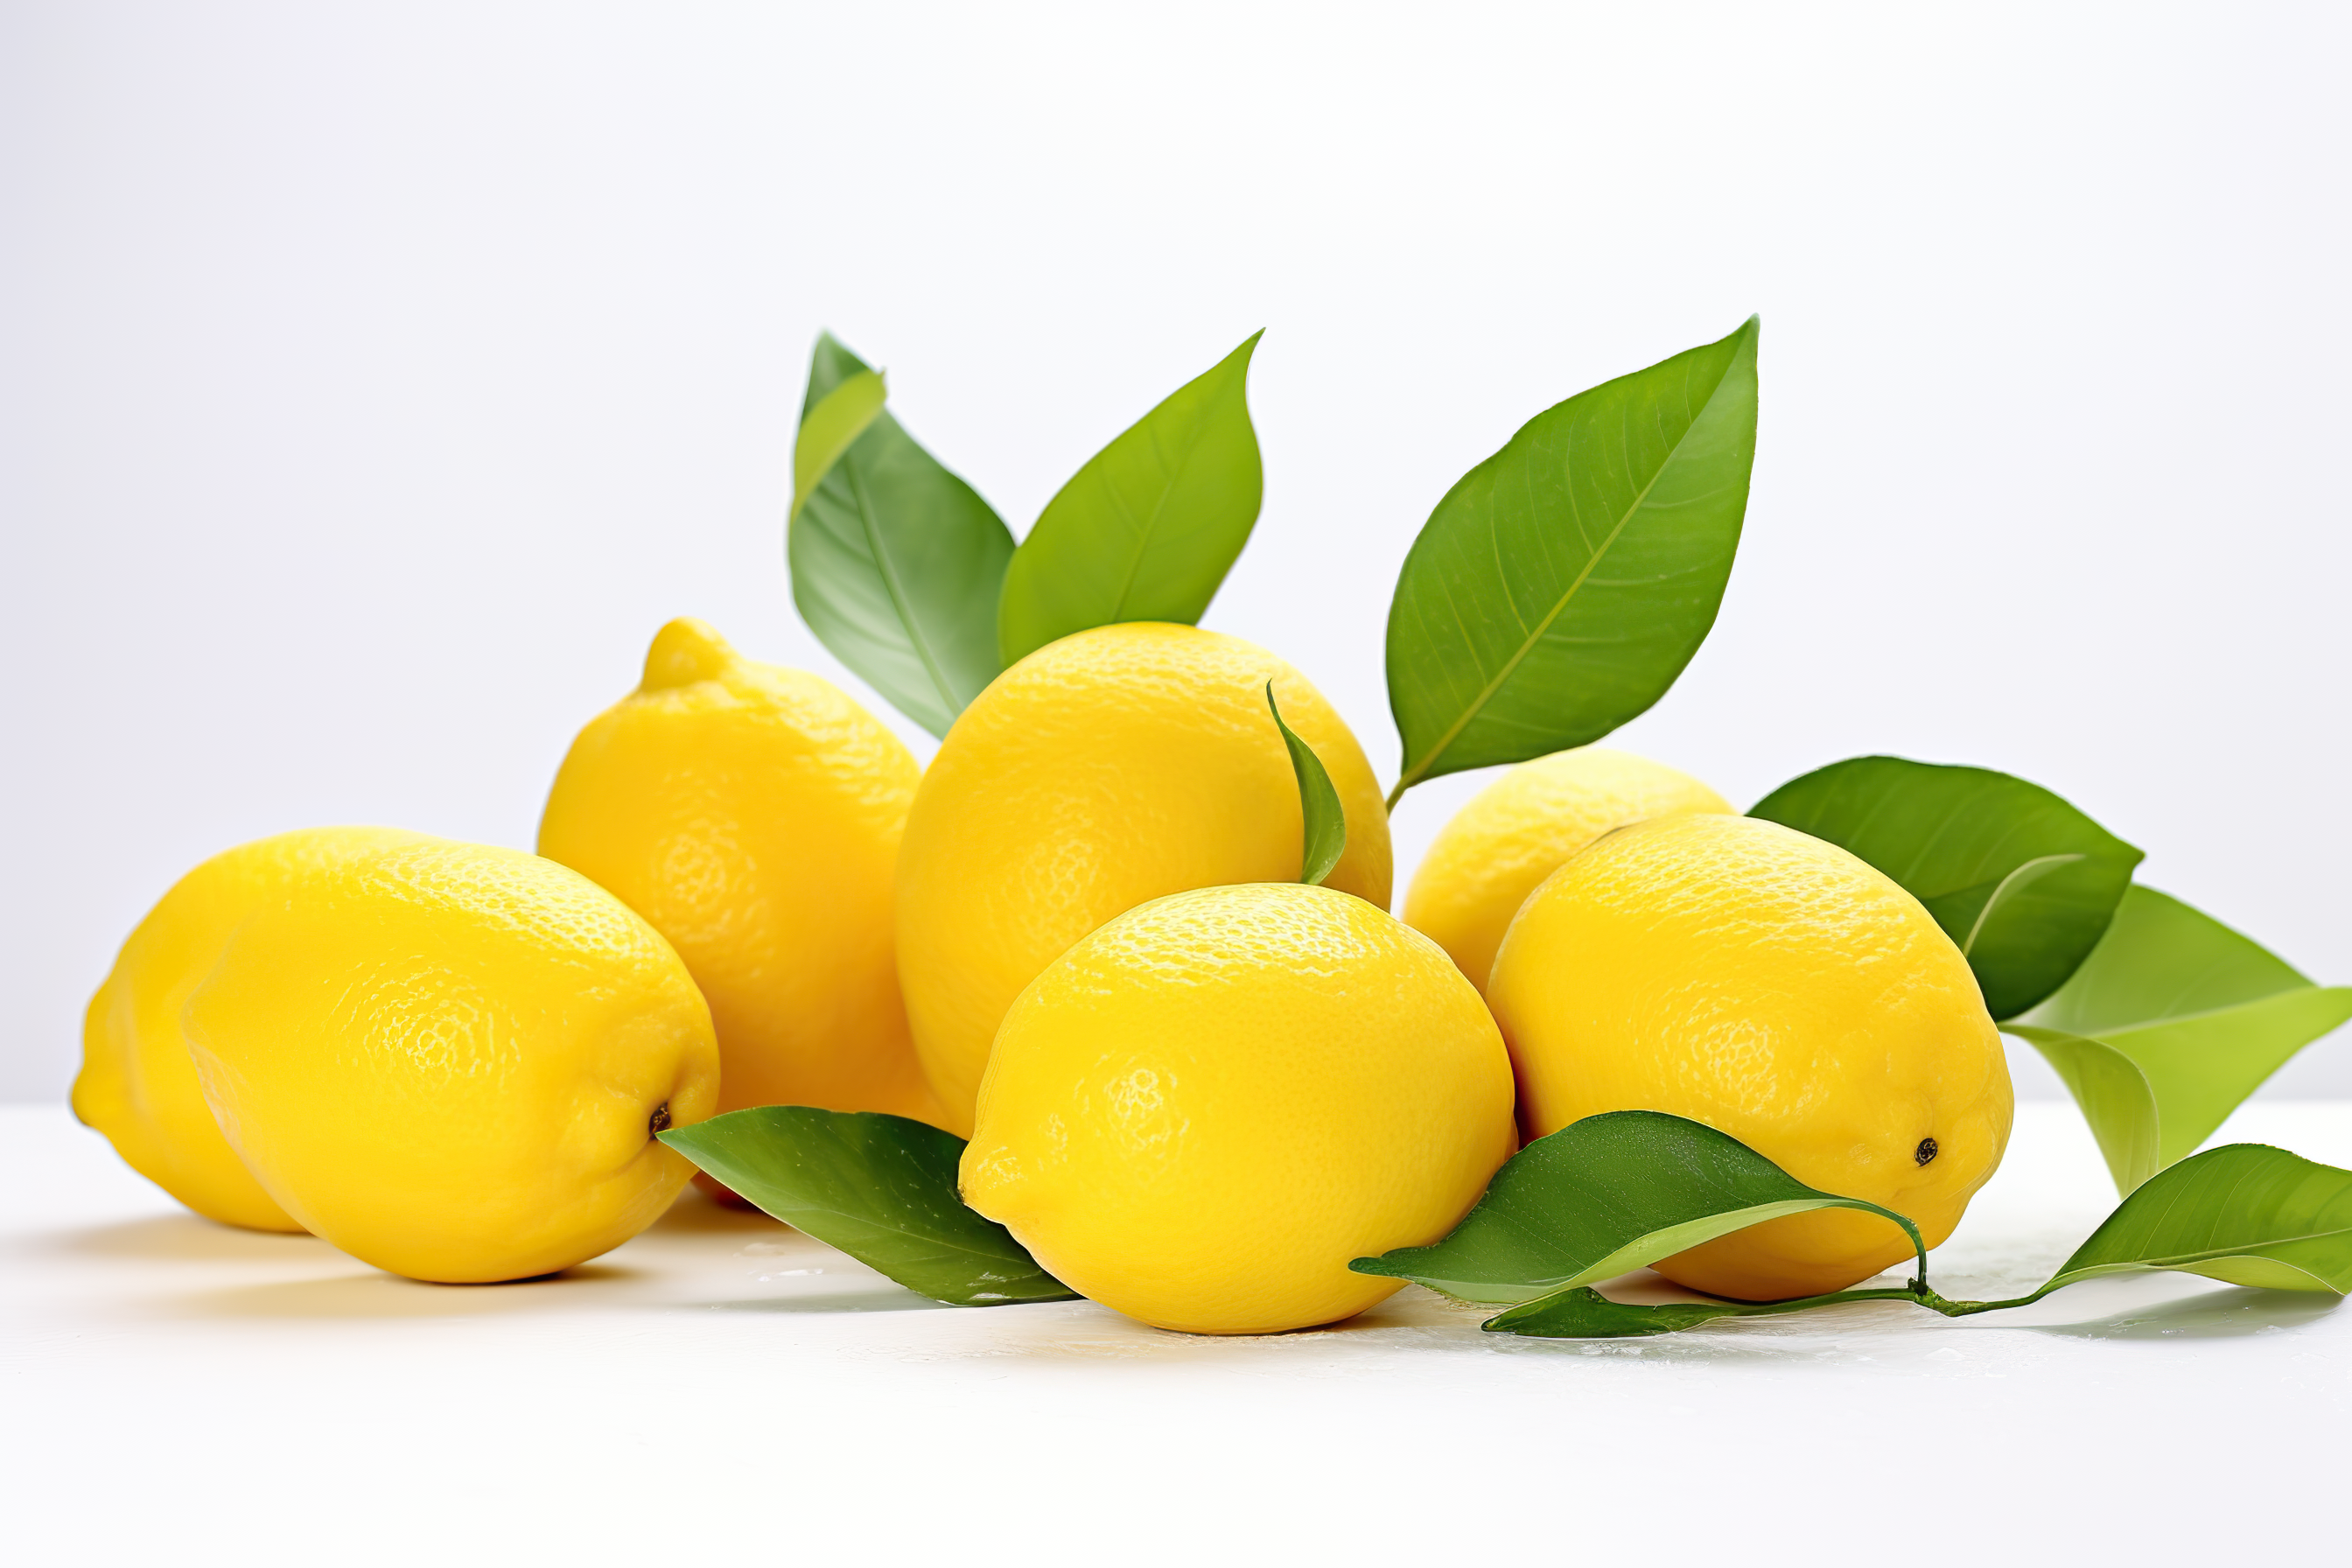 Yellow lemons with green leaves isolated on white background